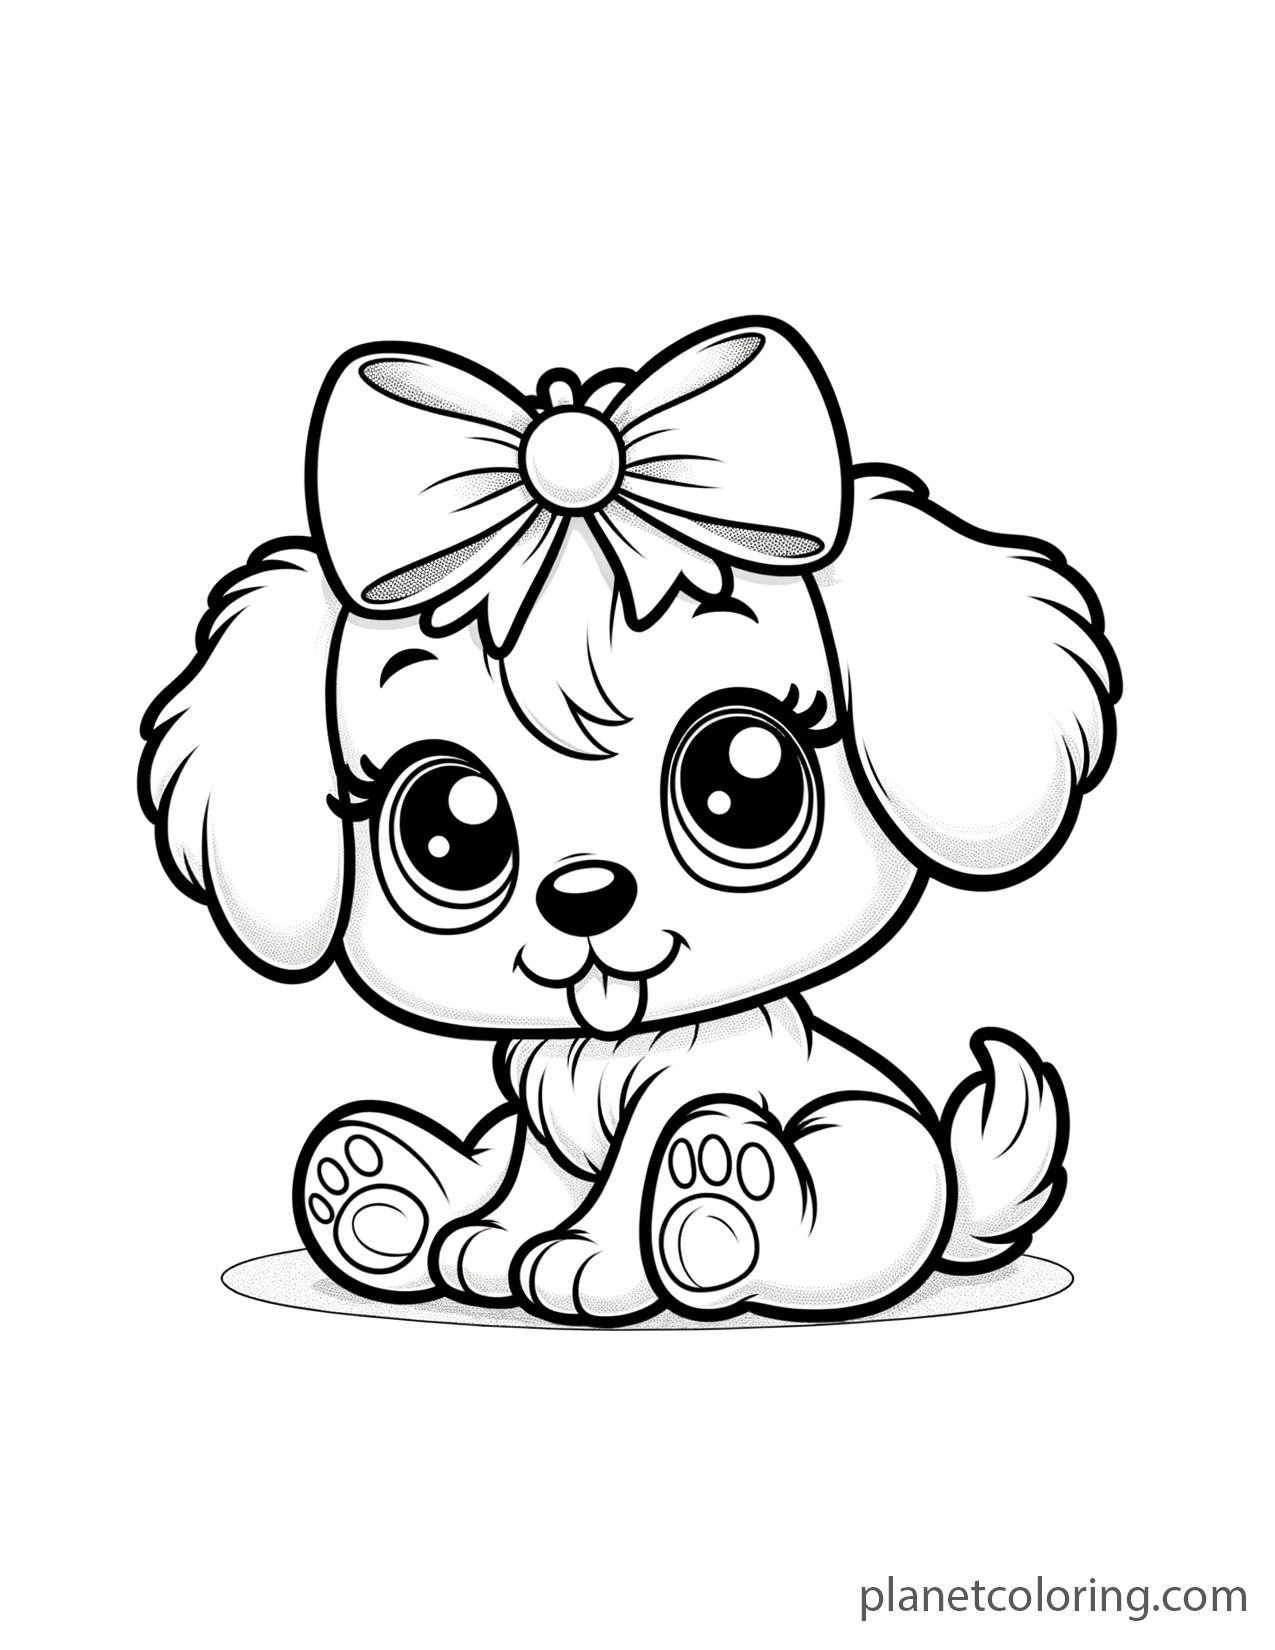 Puppy with a bow